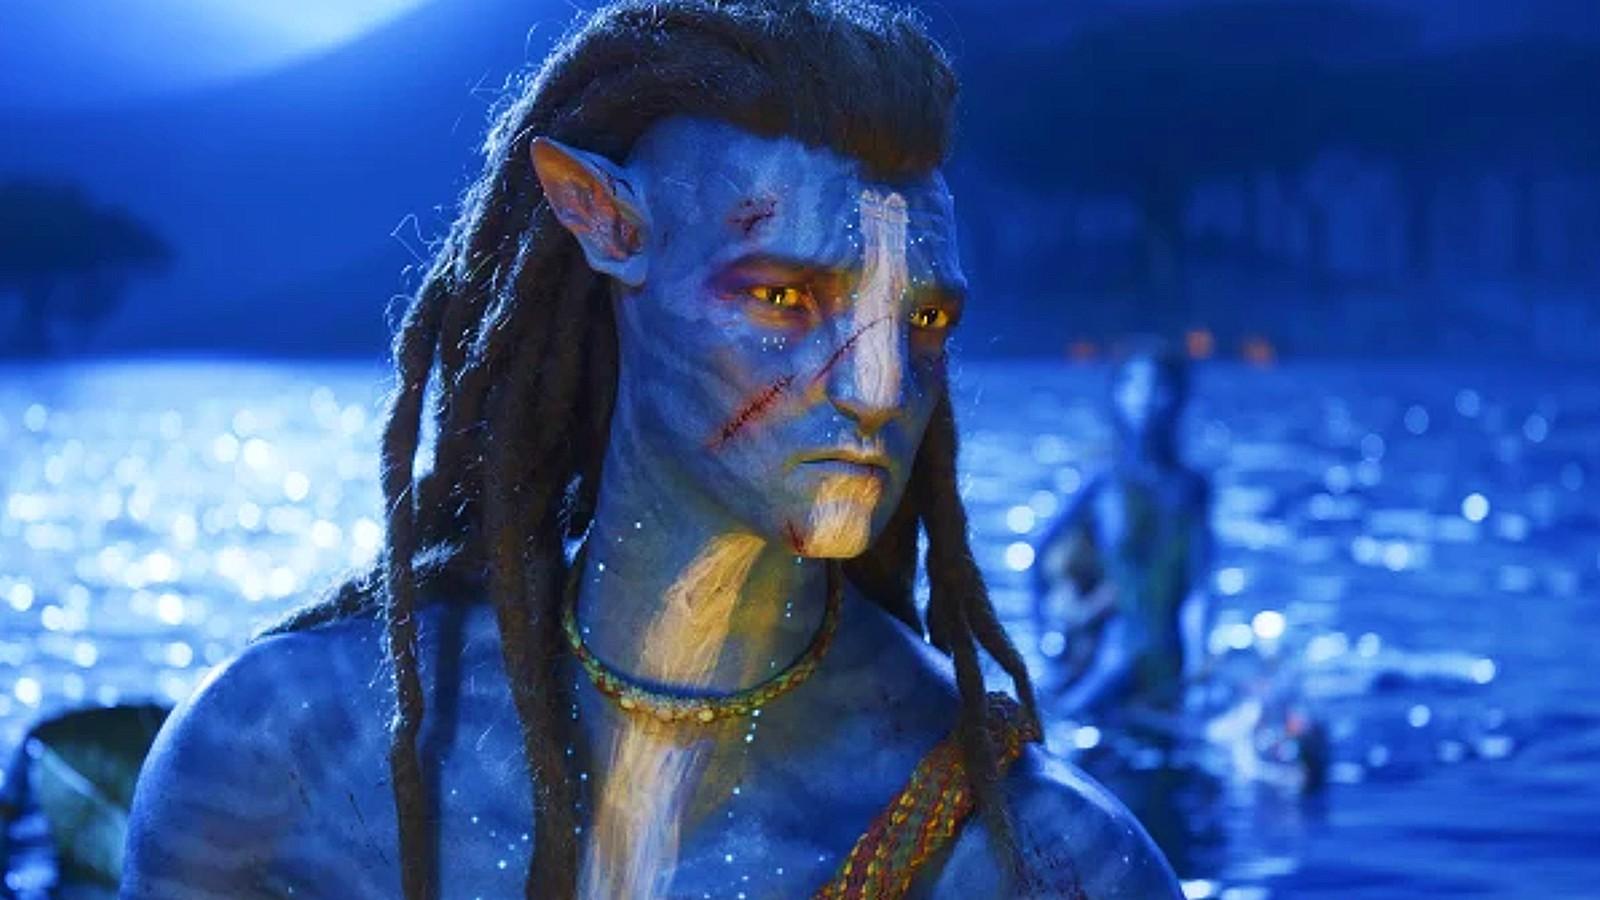 What is the longest movie ever made? Avatar 2, Marvel, Harry